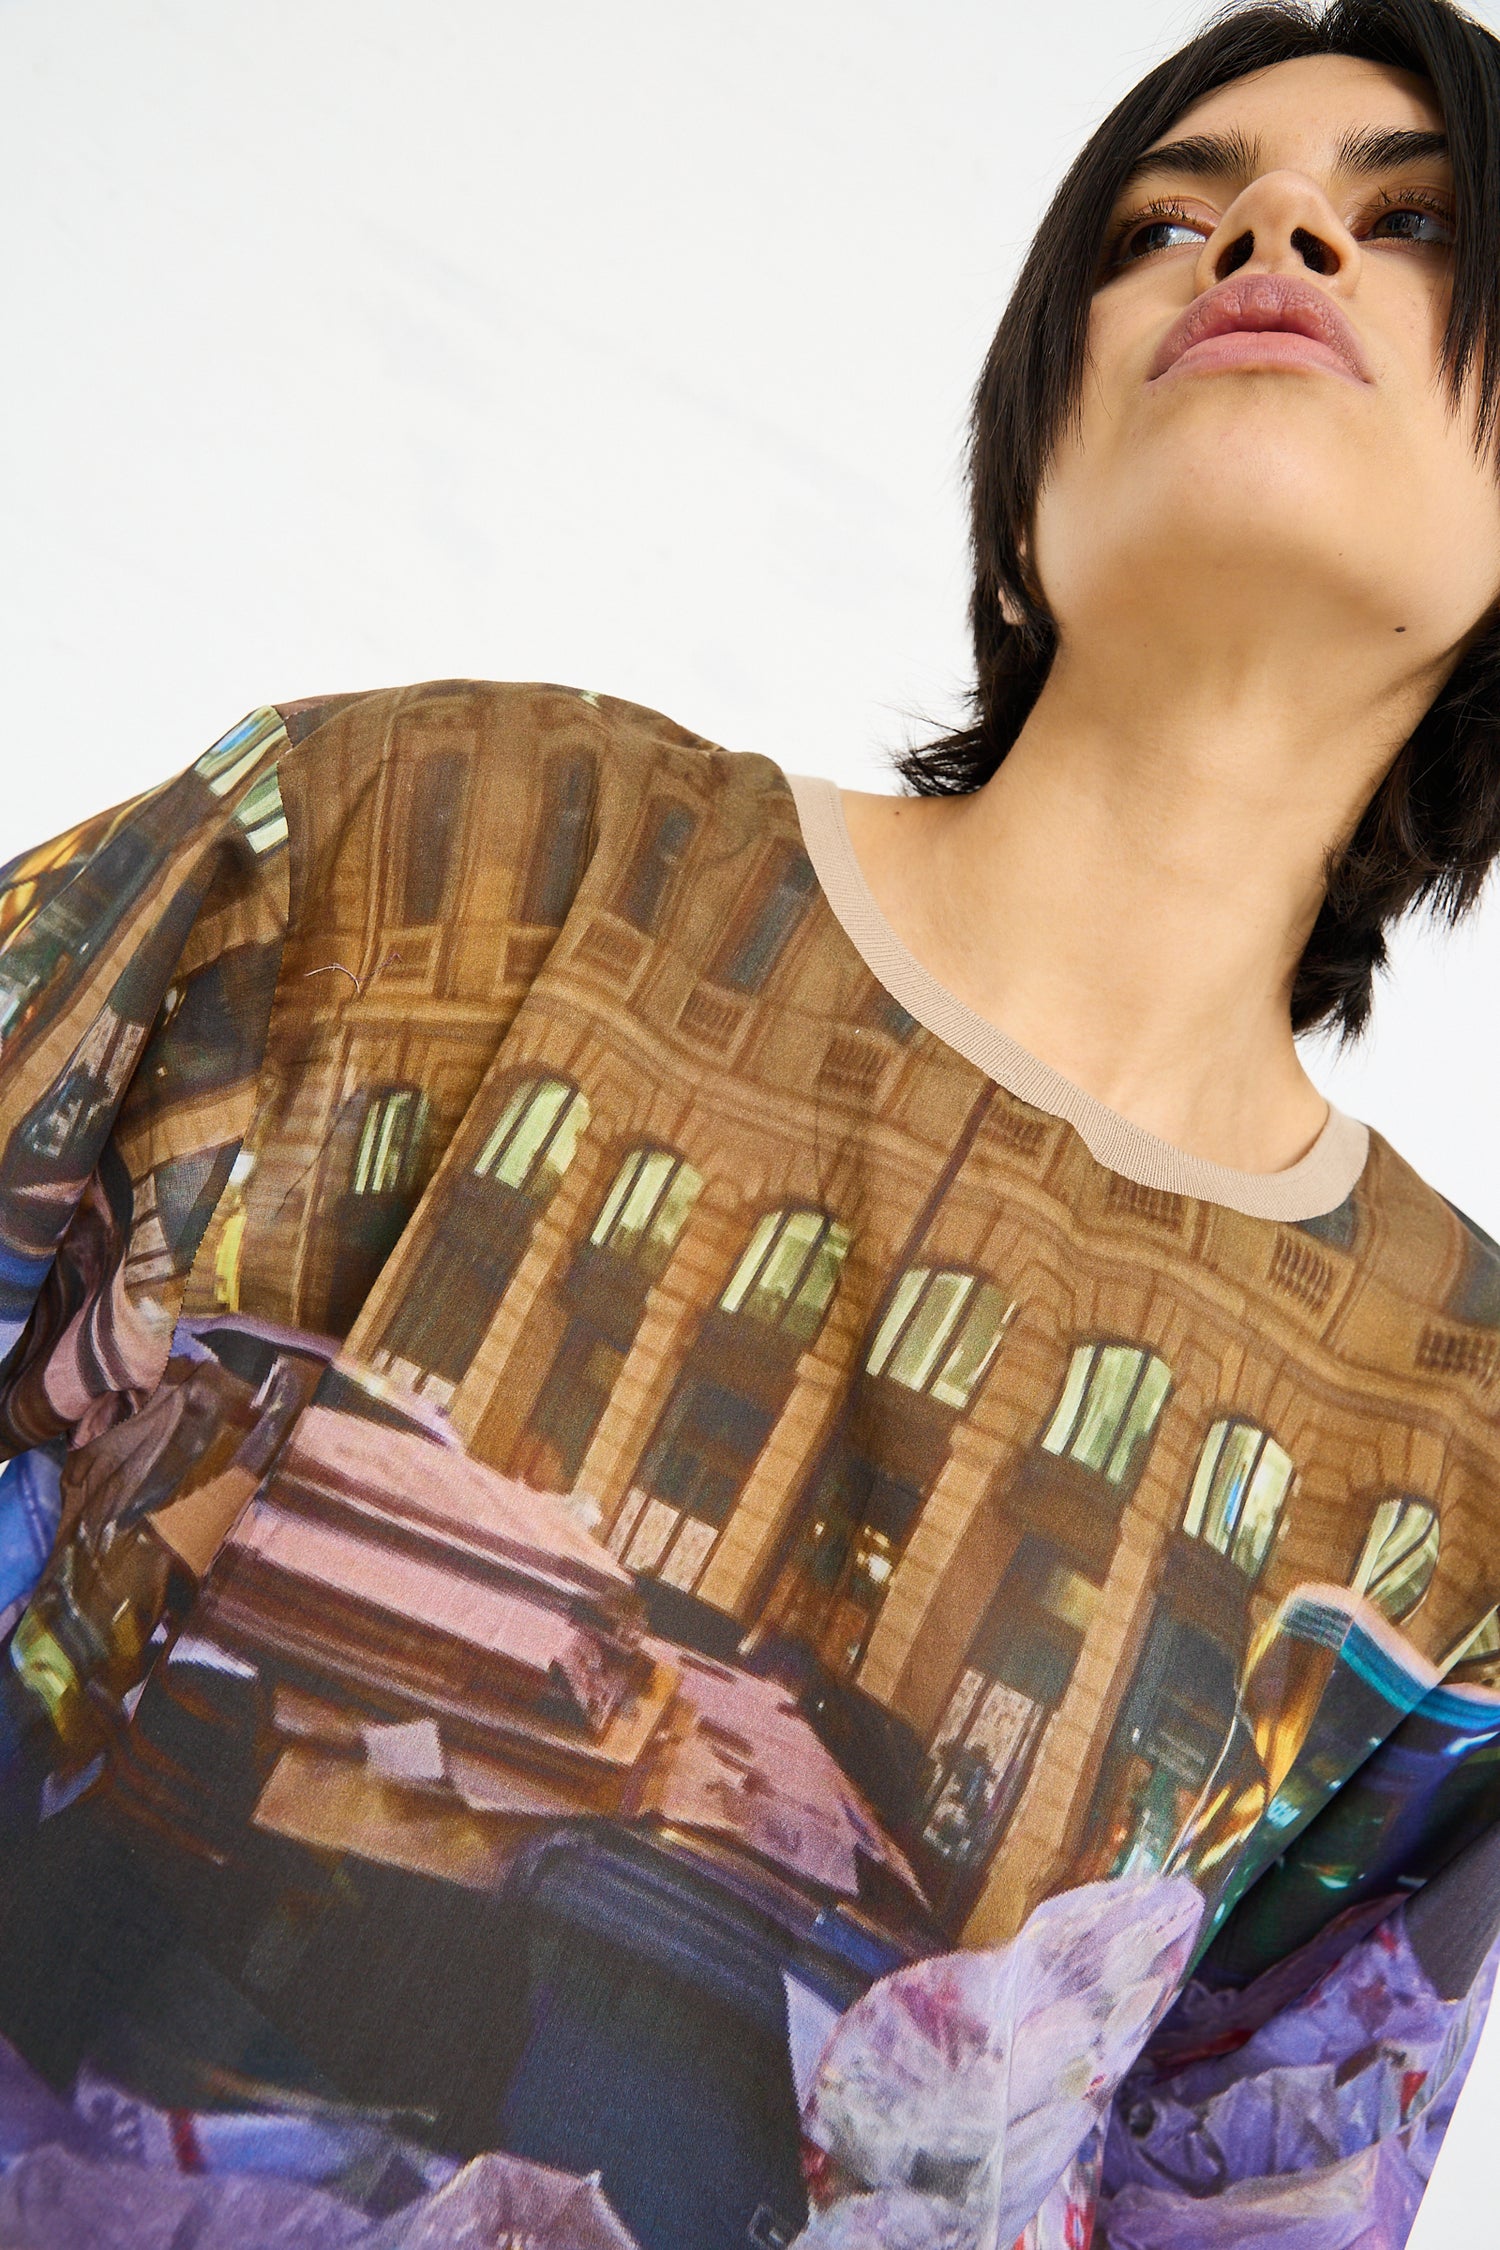 Woman in a Cotton No. 77 Holiday Paris Strike Tee by Bless with architectural print looking up.